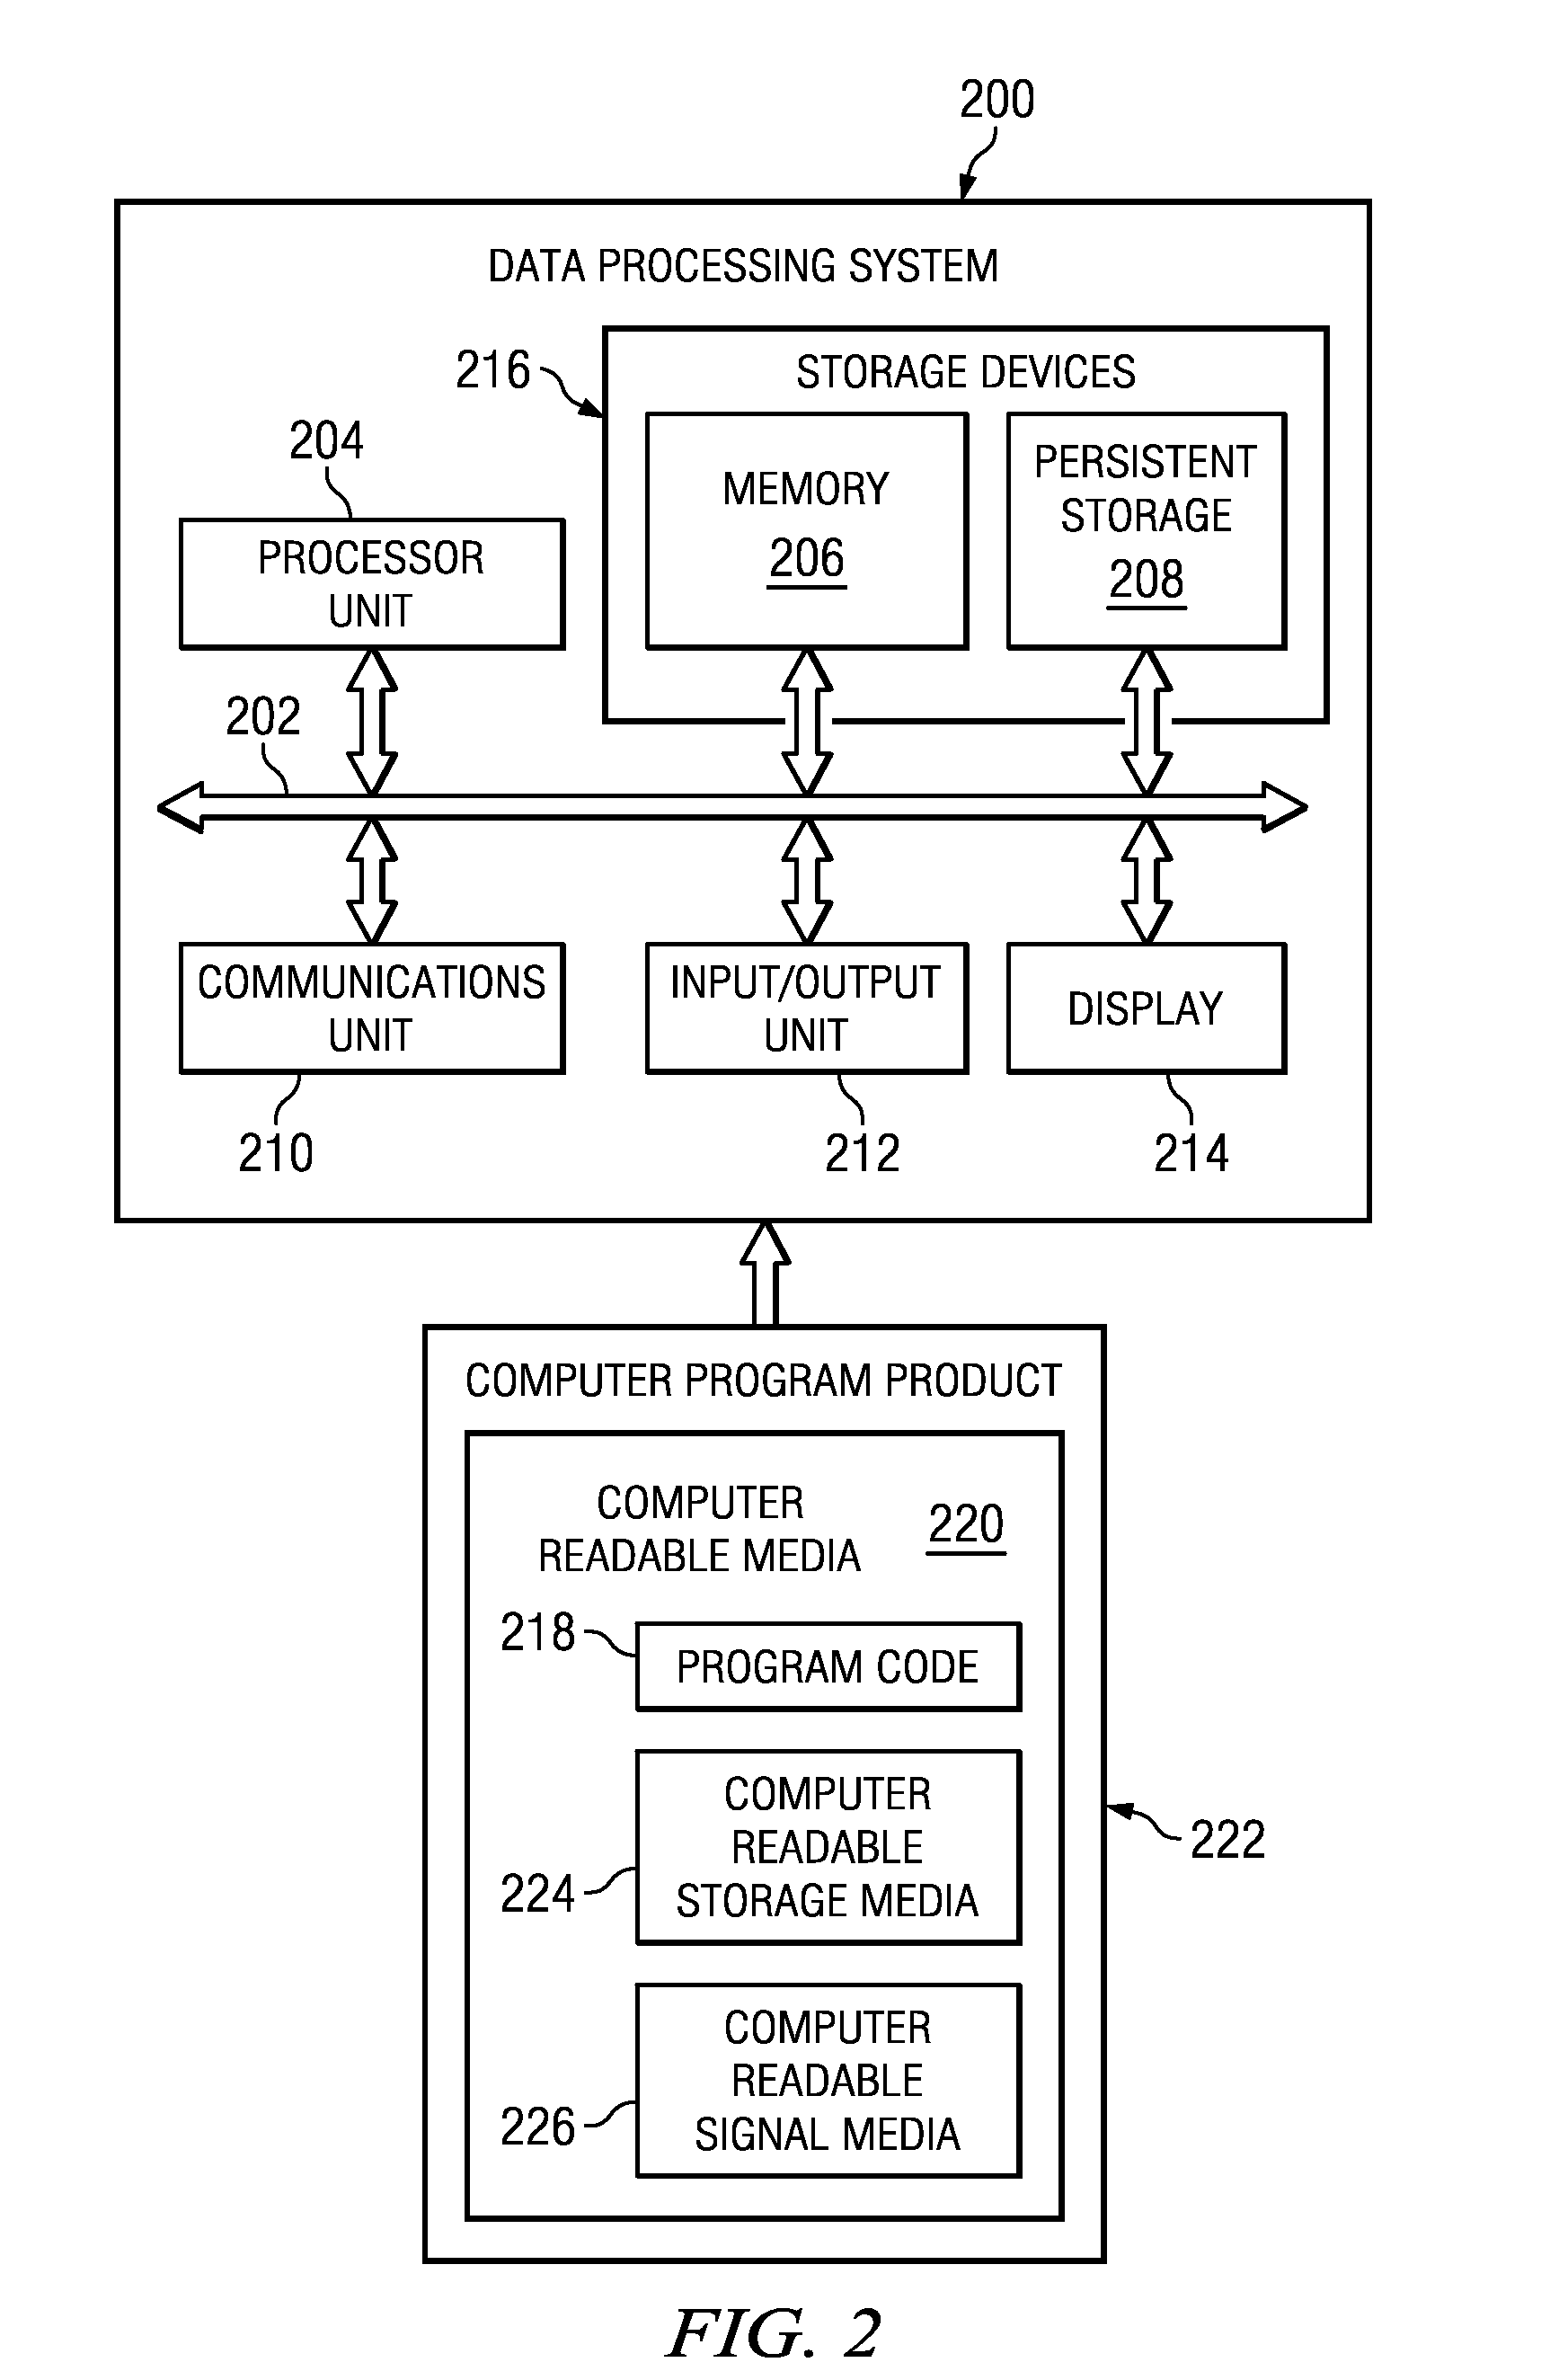 Airspeed sensing system for an aircraft